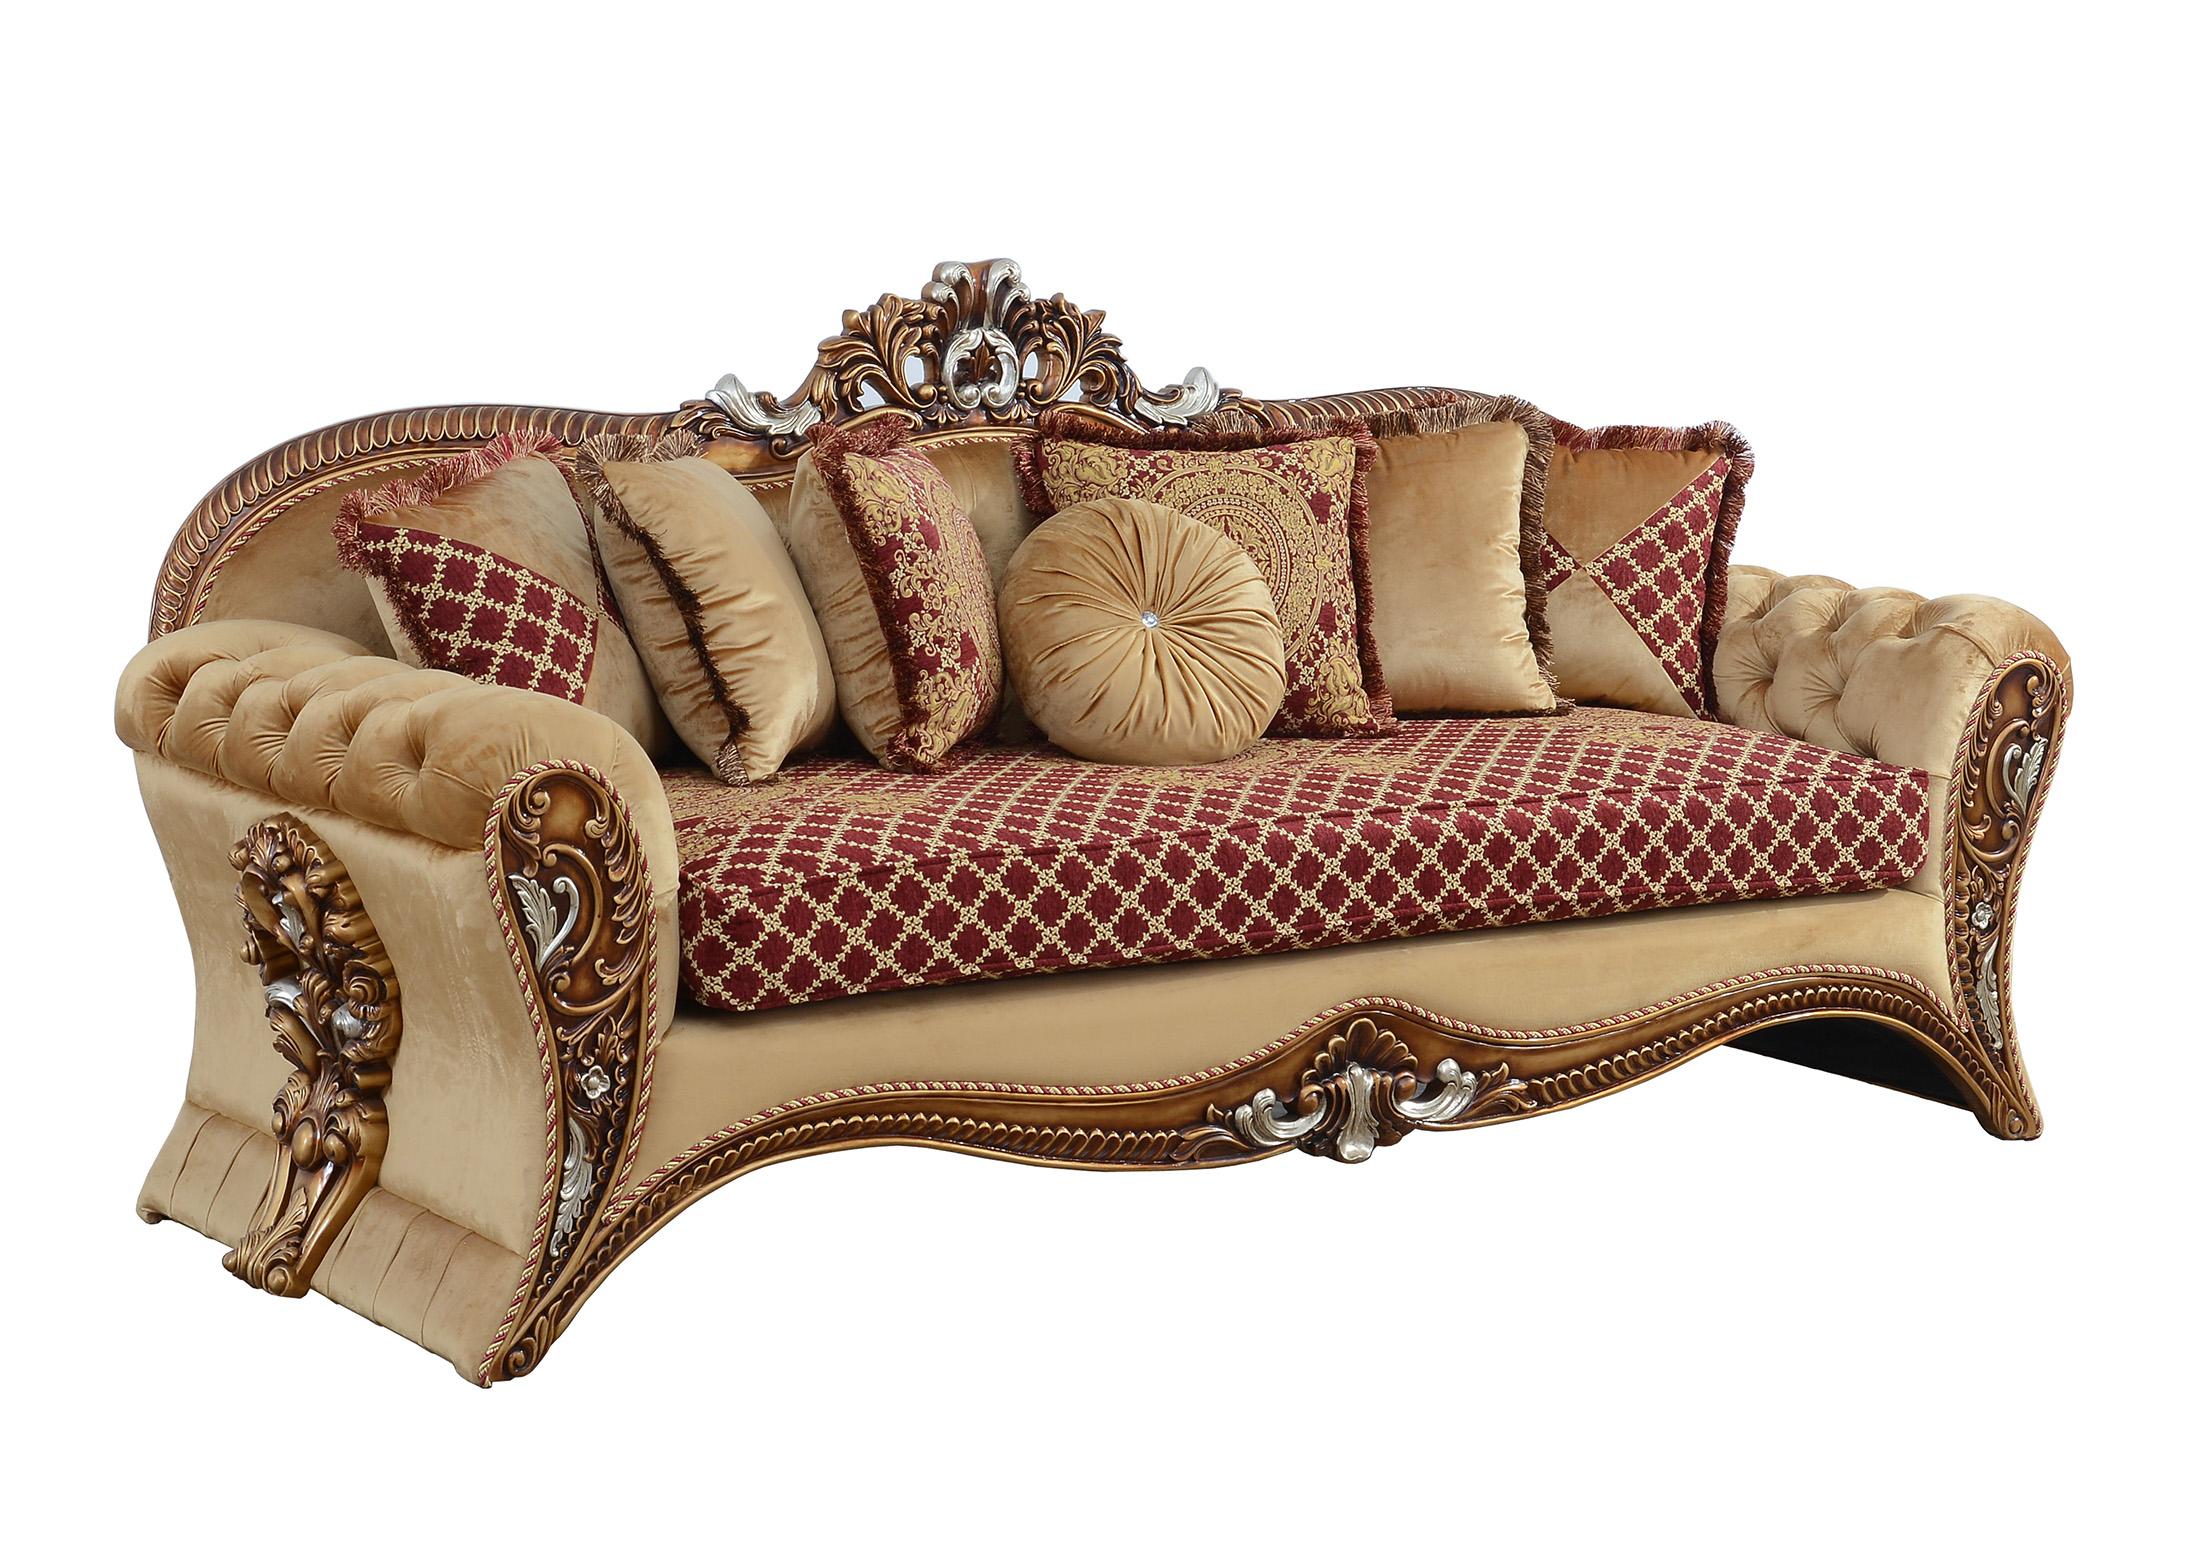 Classic, Traditional Sofa EMPERADOR III 42036-S in Red, Gold Fabric